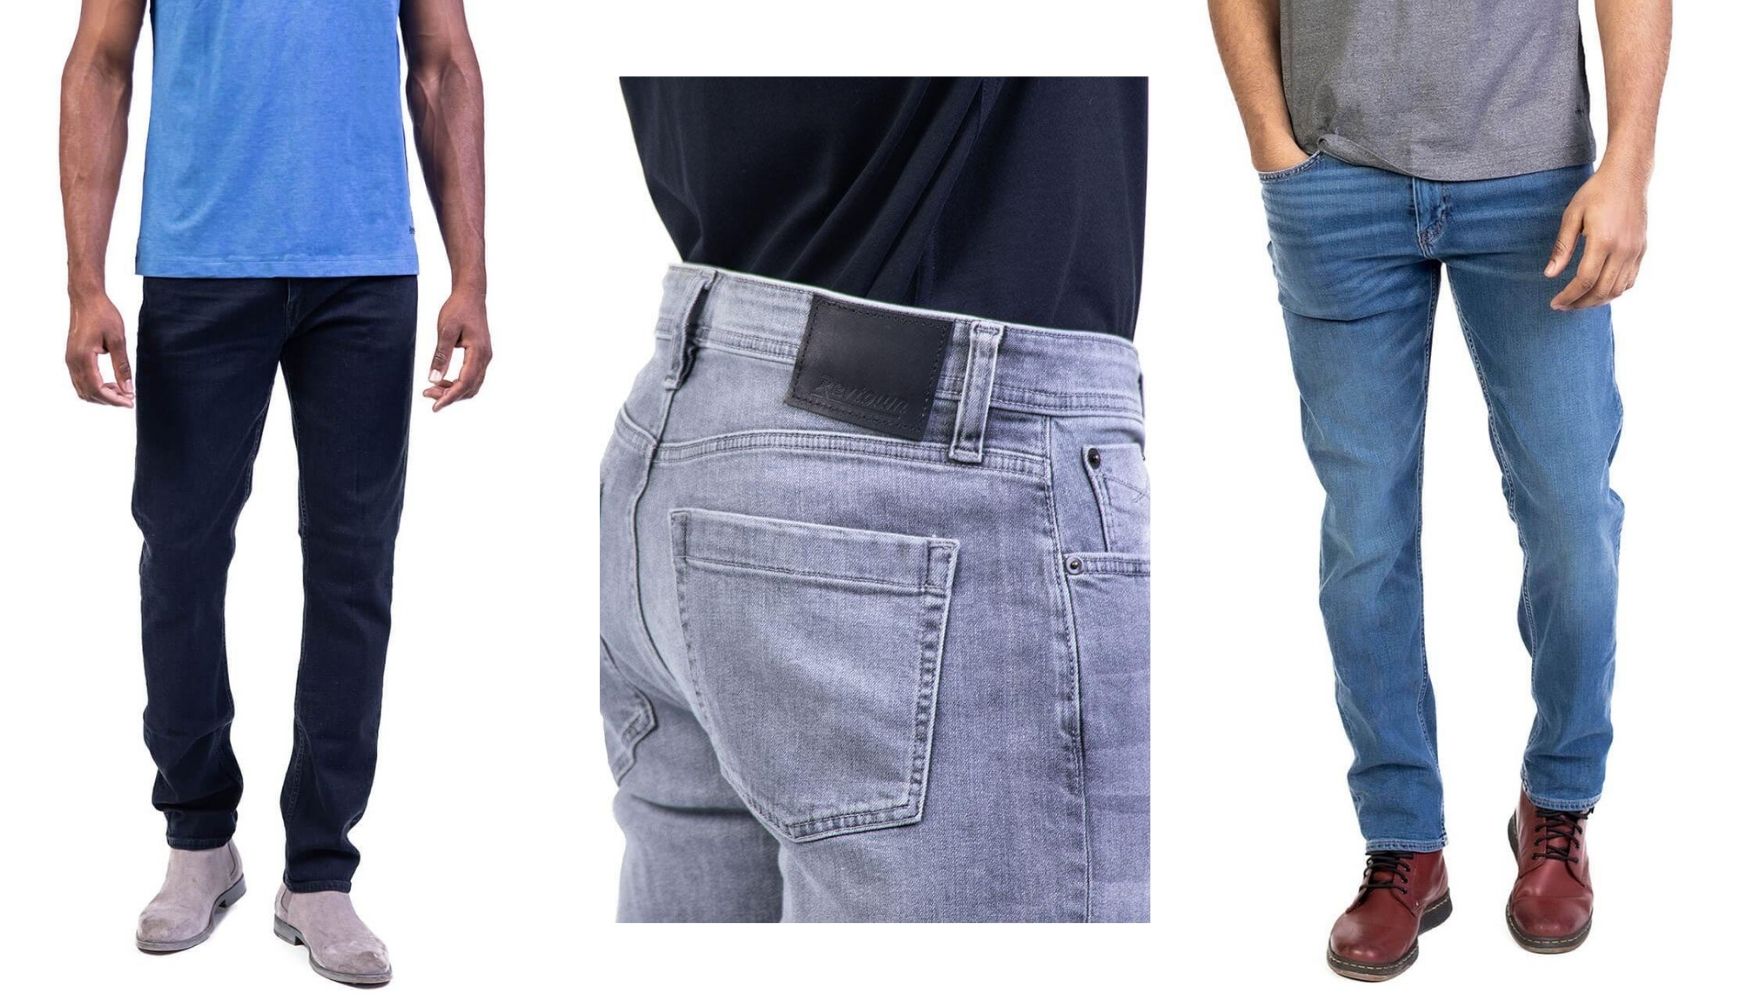 My Revtown Jeans Review in 2021: Is Their Denim Worth It? | ClothedUp